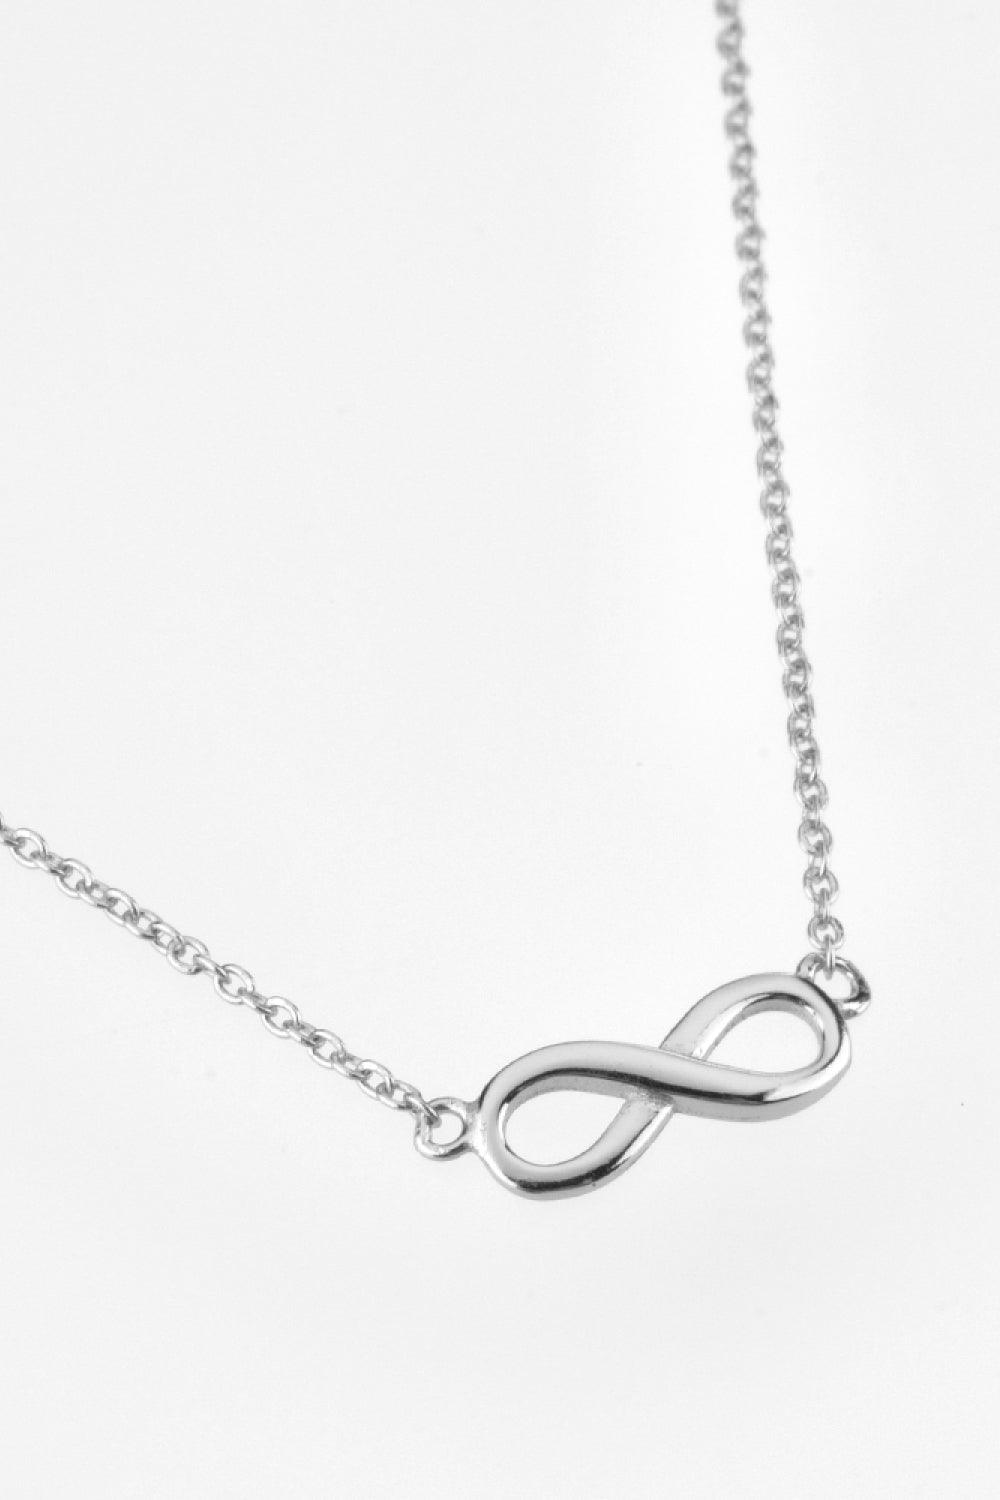 Infinity Loop 925 Sterling Silver Necklace - God's Girl Gifts And Apparel